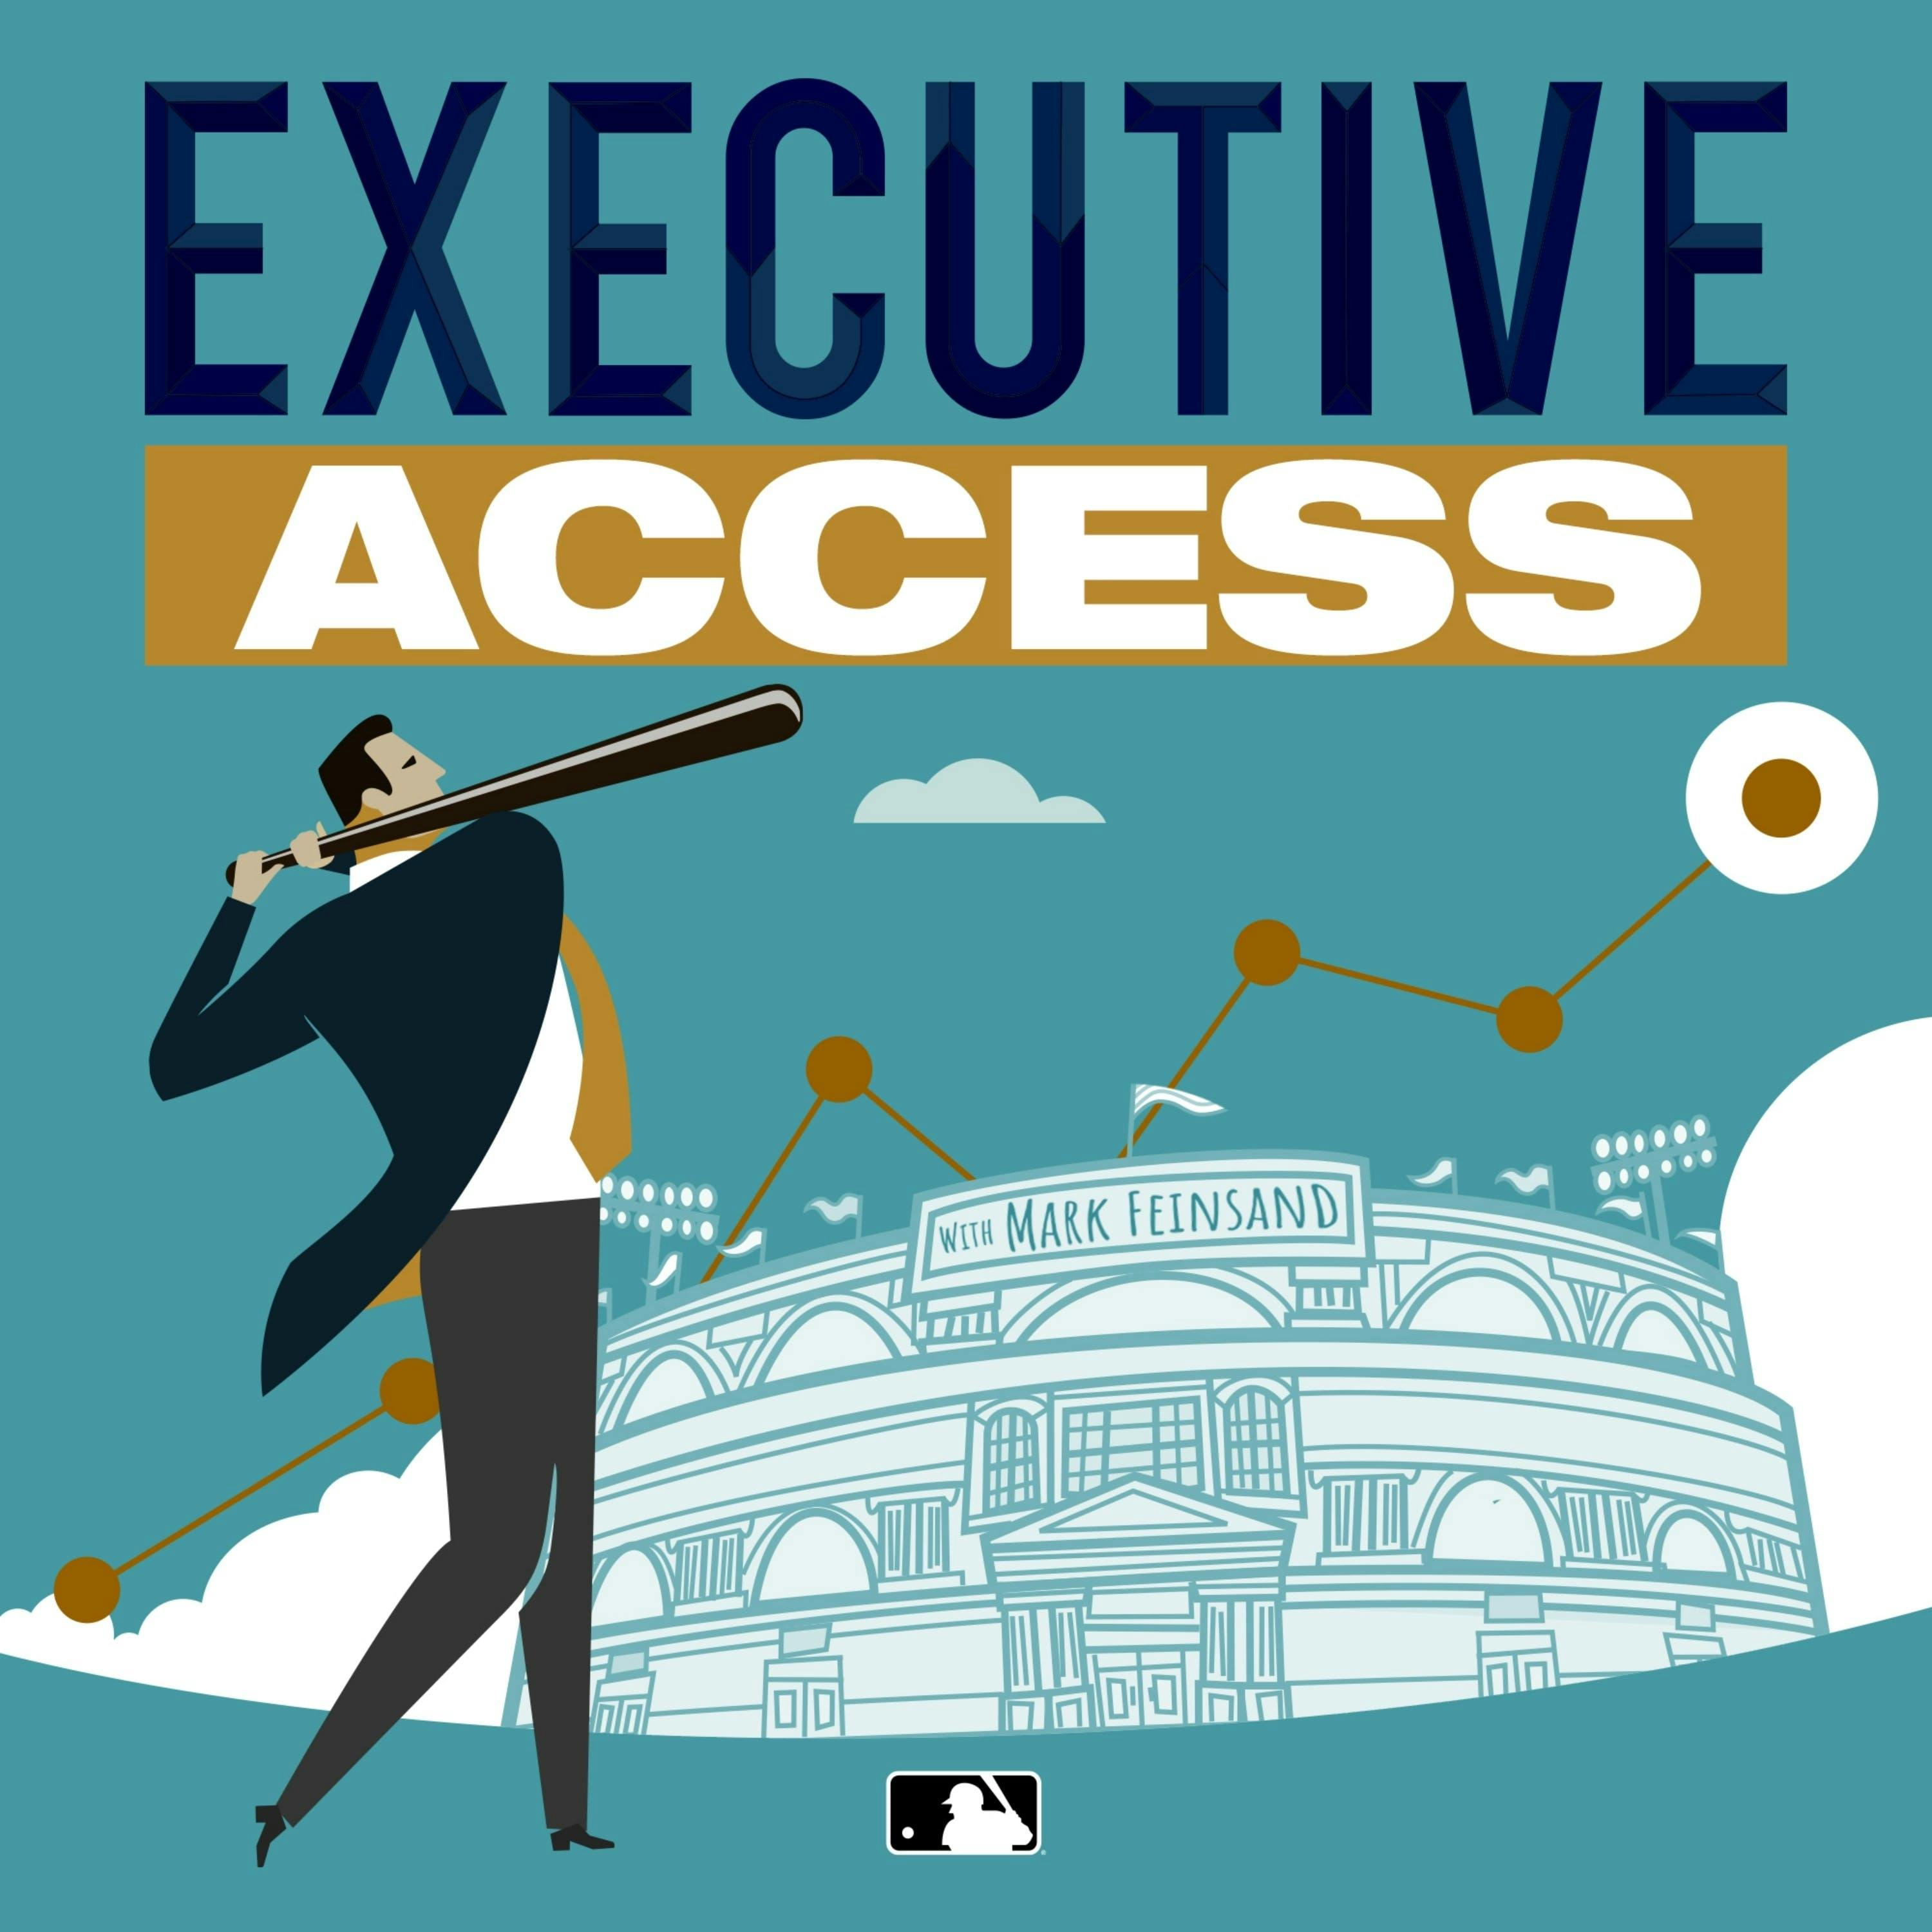 Ep. 49: Three former Yankees on their transition from the playing field to the Front Office